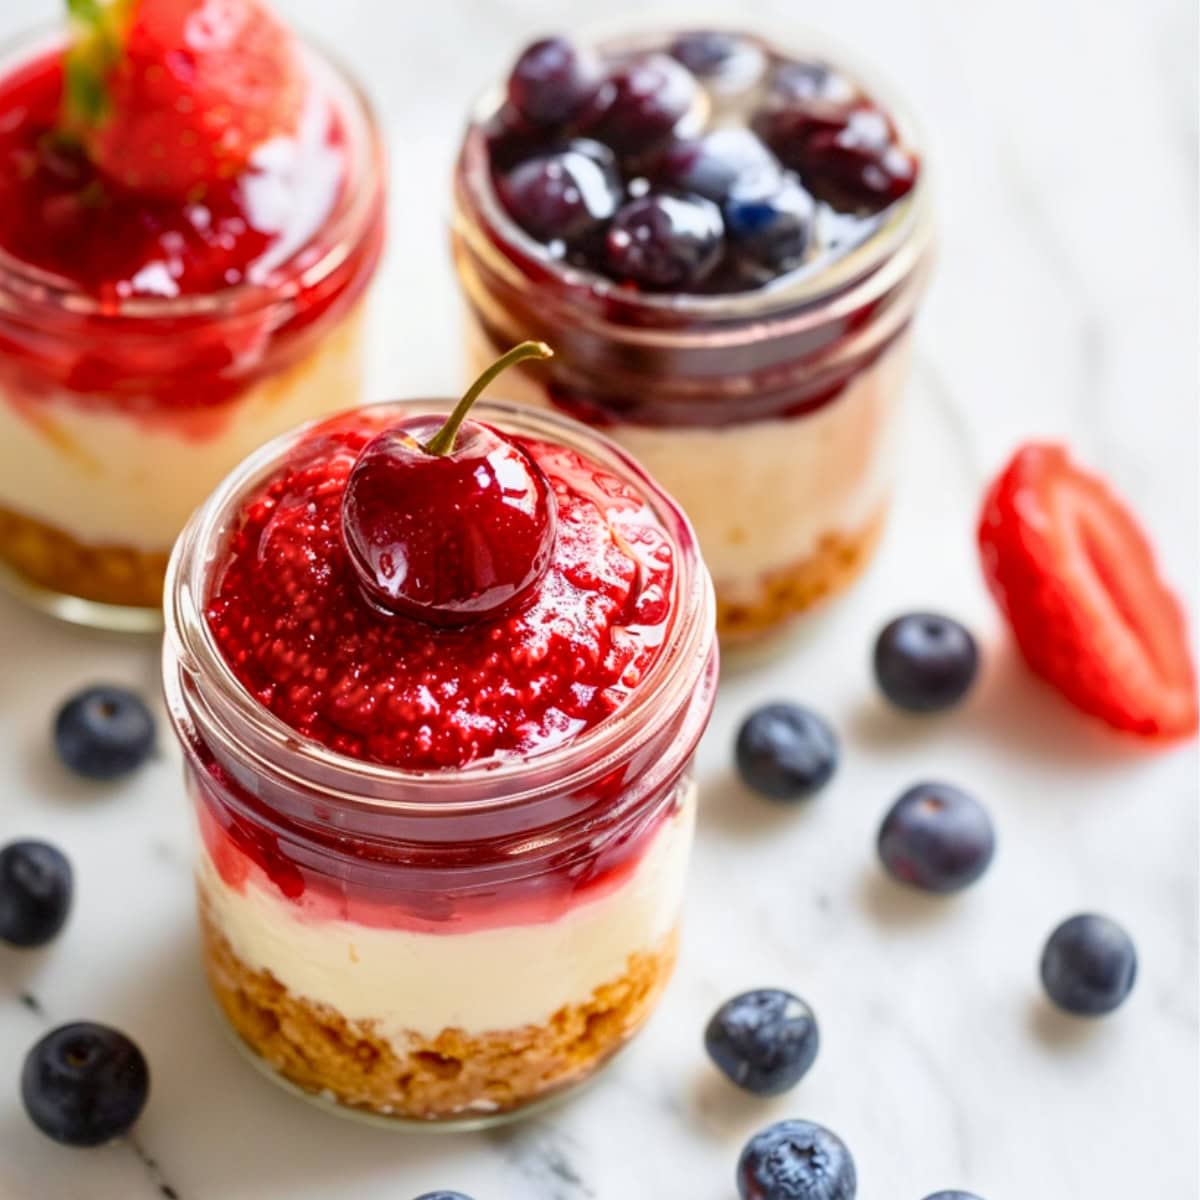 Three cheesecake jar with strawberry, blueberry and cherry on top.